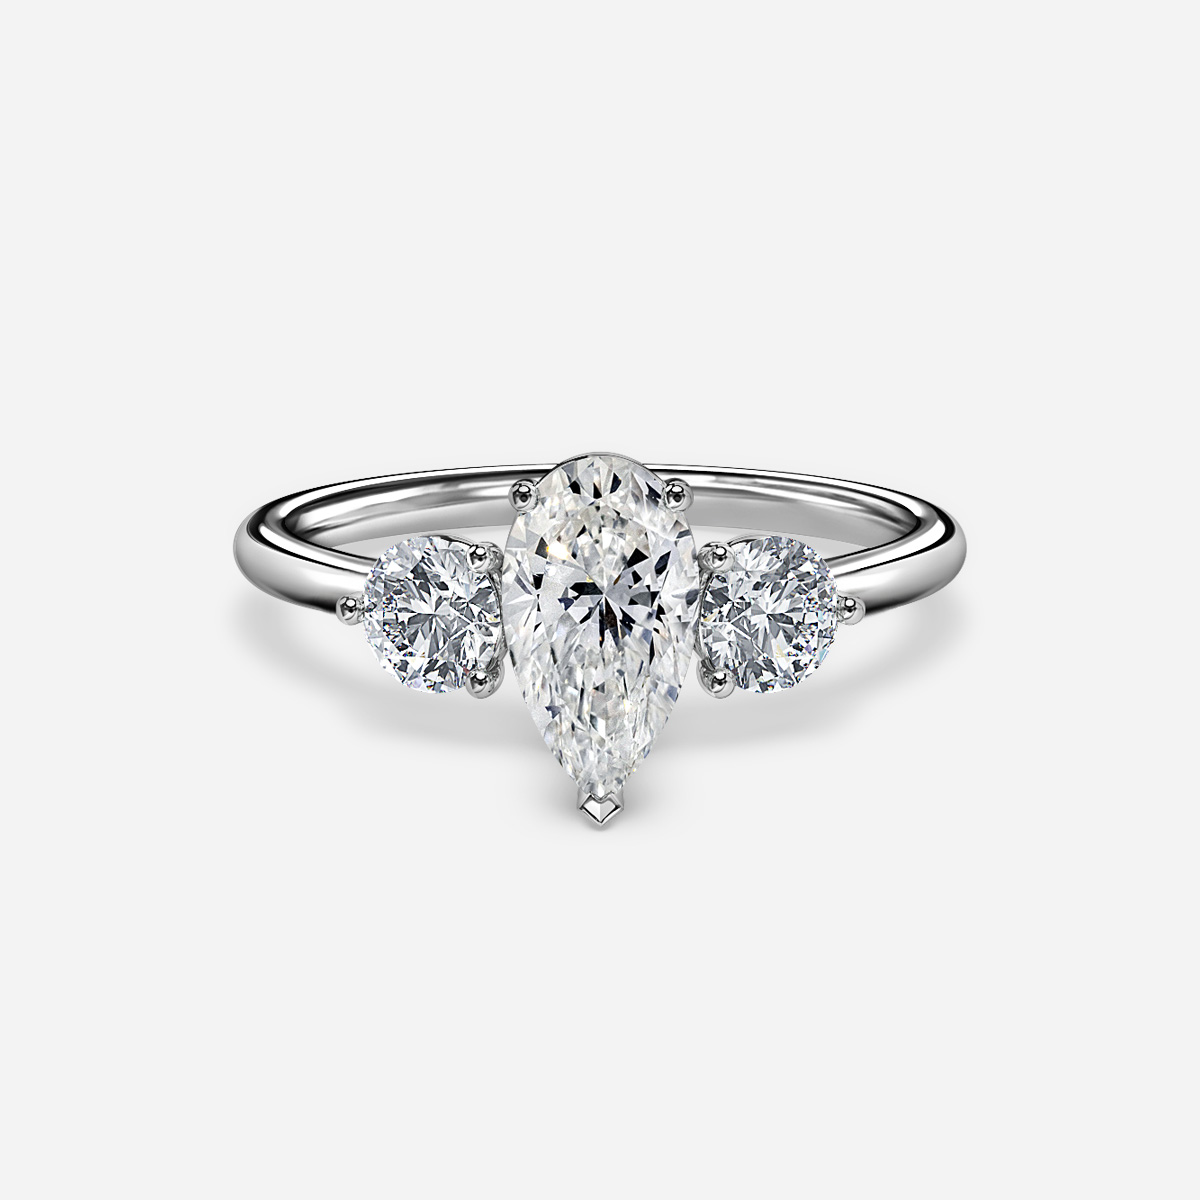 Trinity White Gold Trilogy Engagement Ring